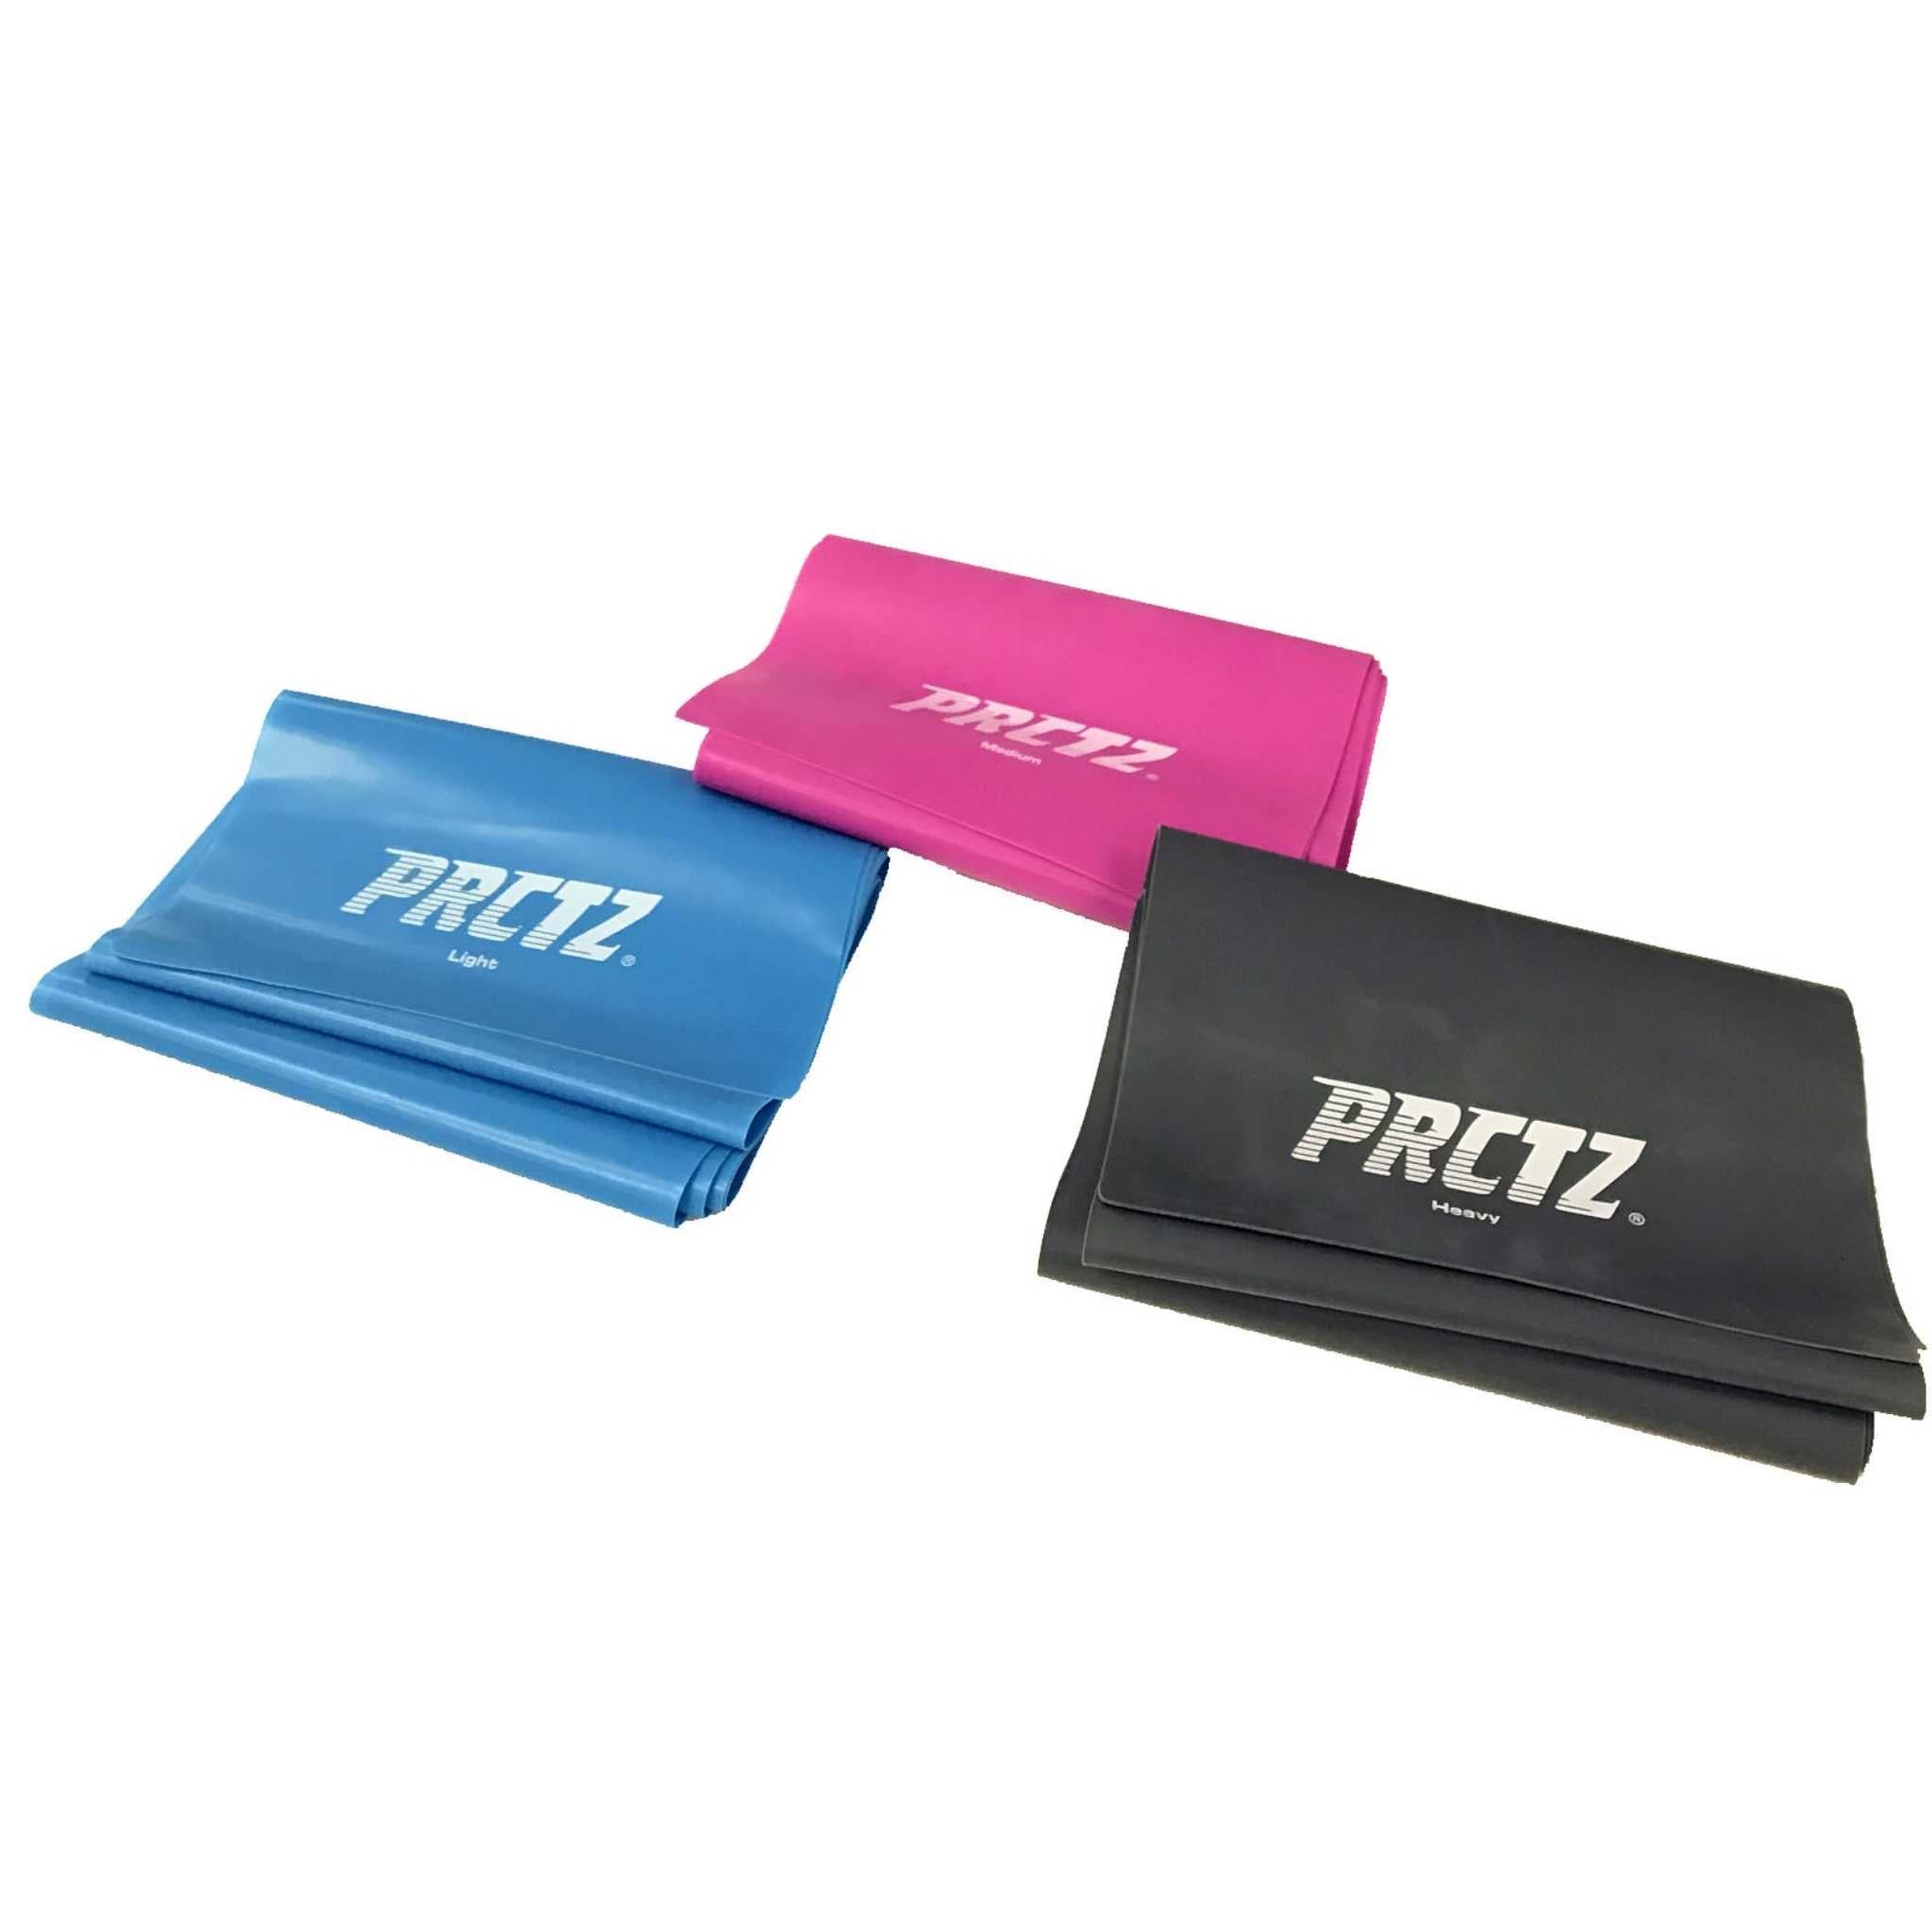 Resistance Band Set, Includes Light, Medium and Heavy Resistance Bands